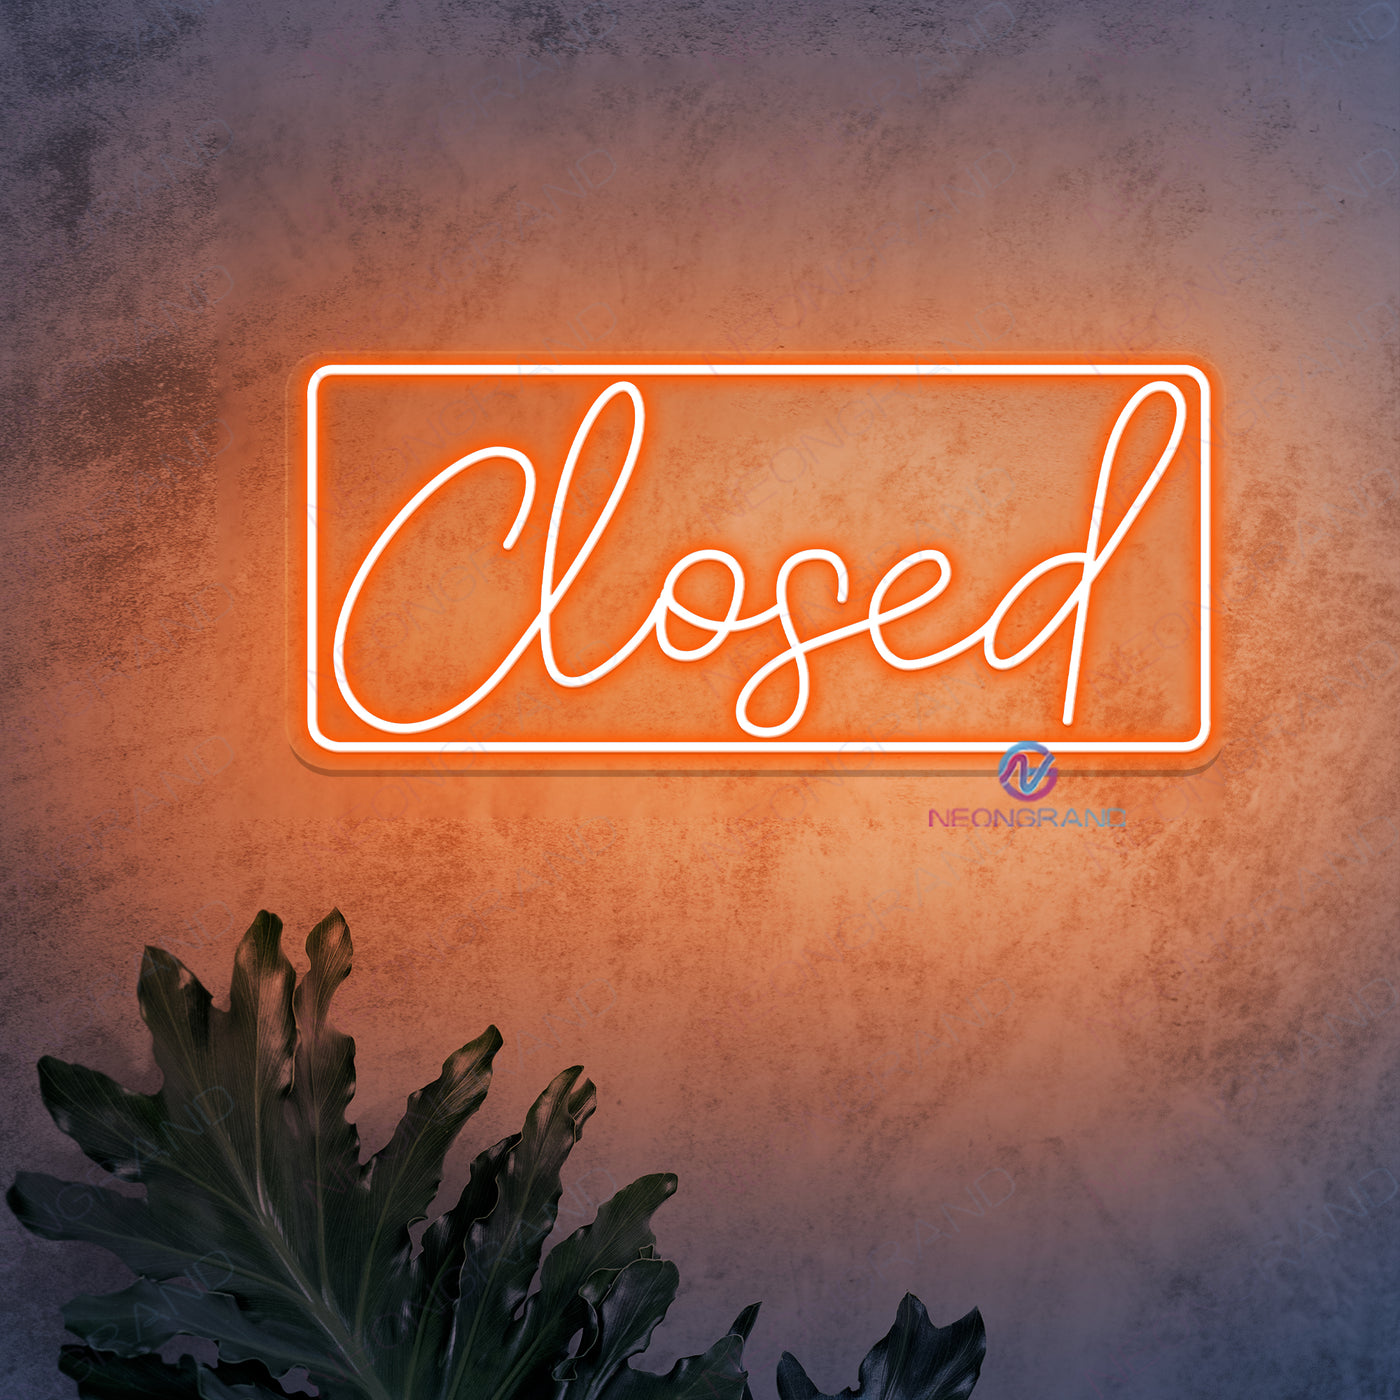 Closed Neon Sign Storefront Led Light